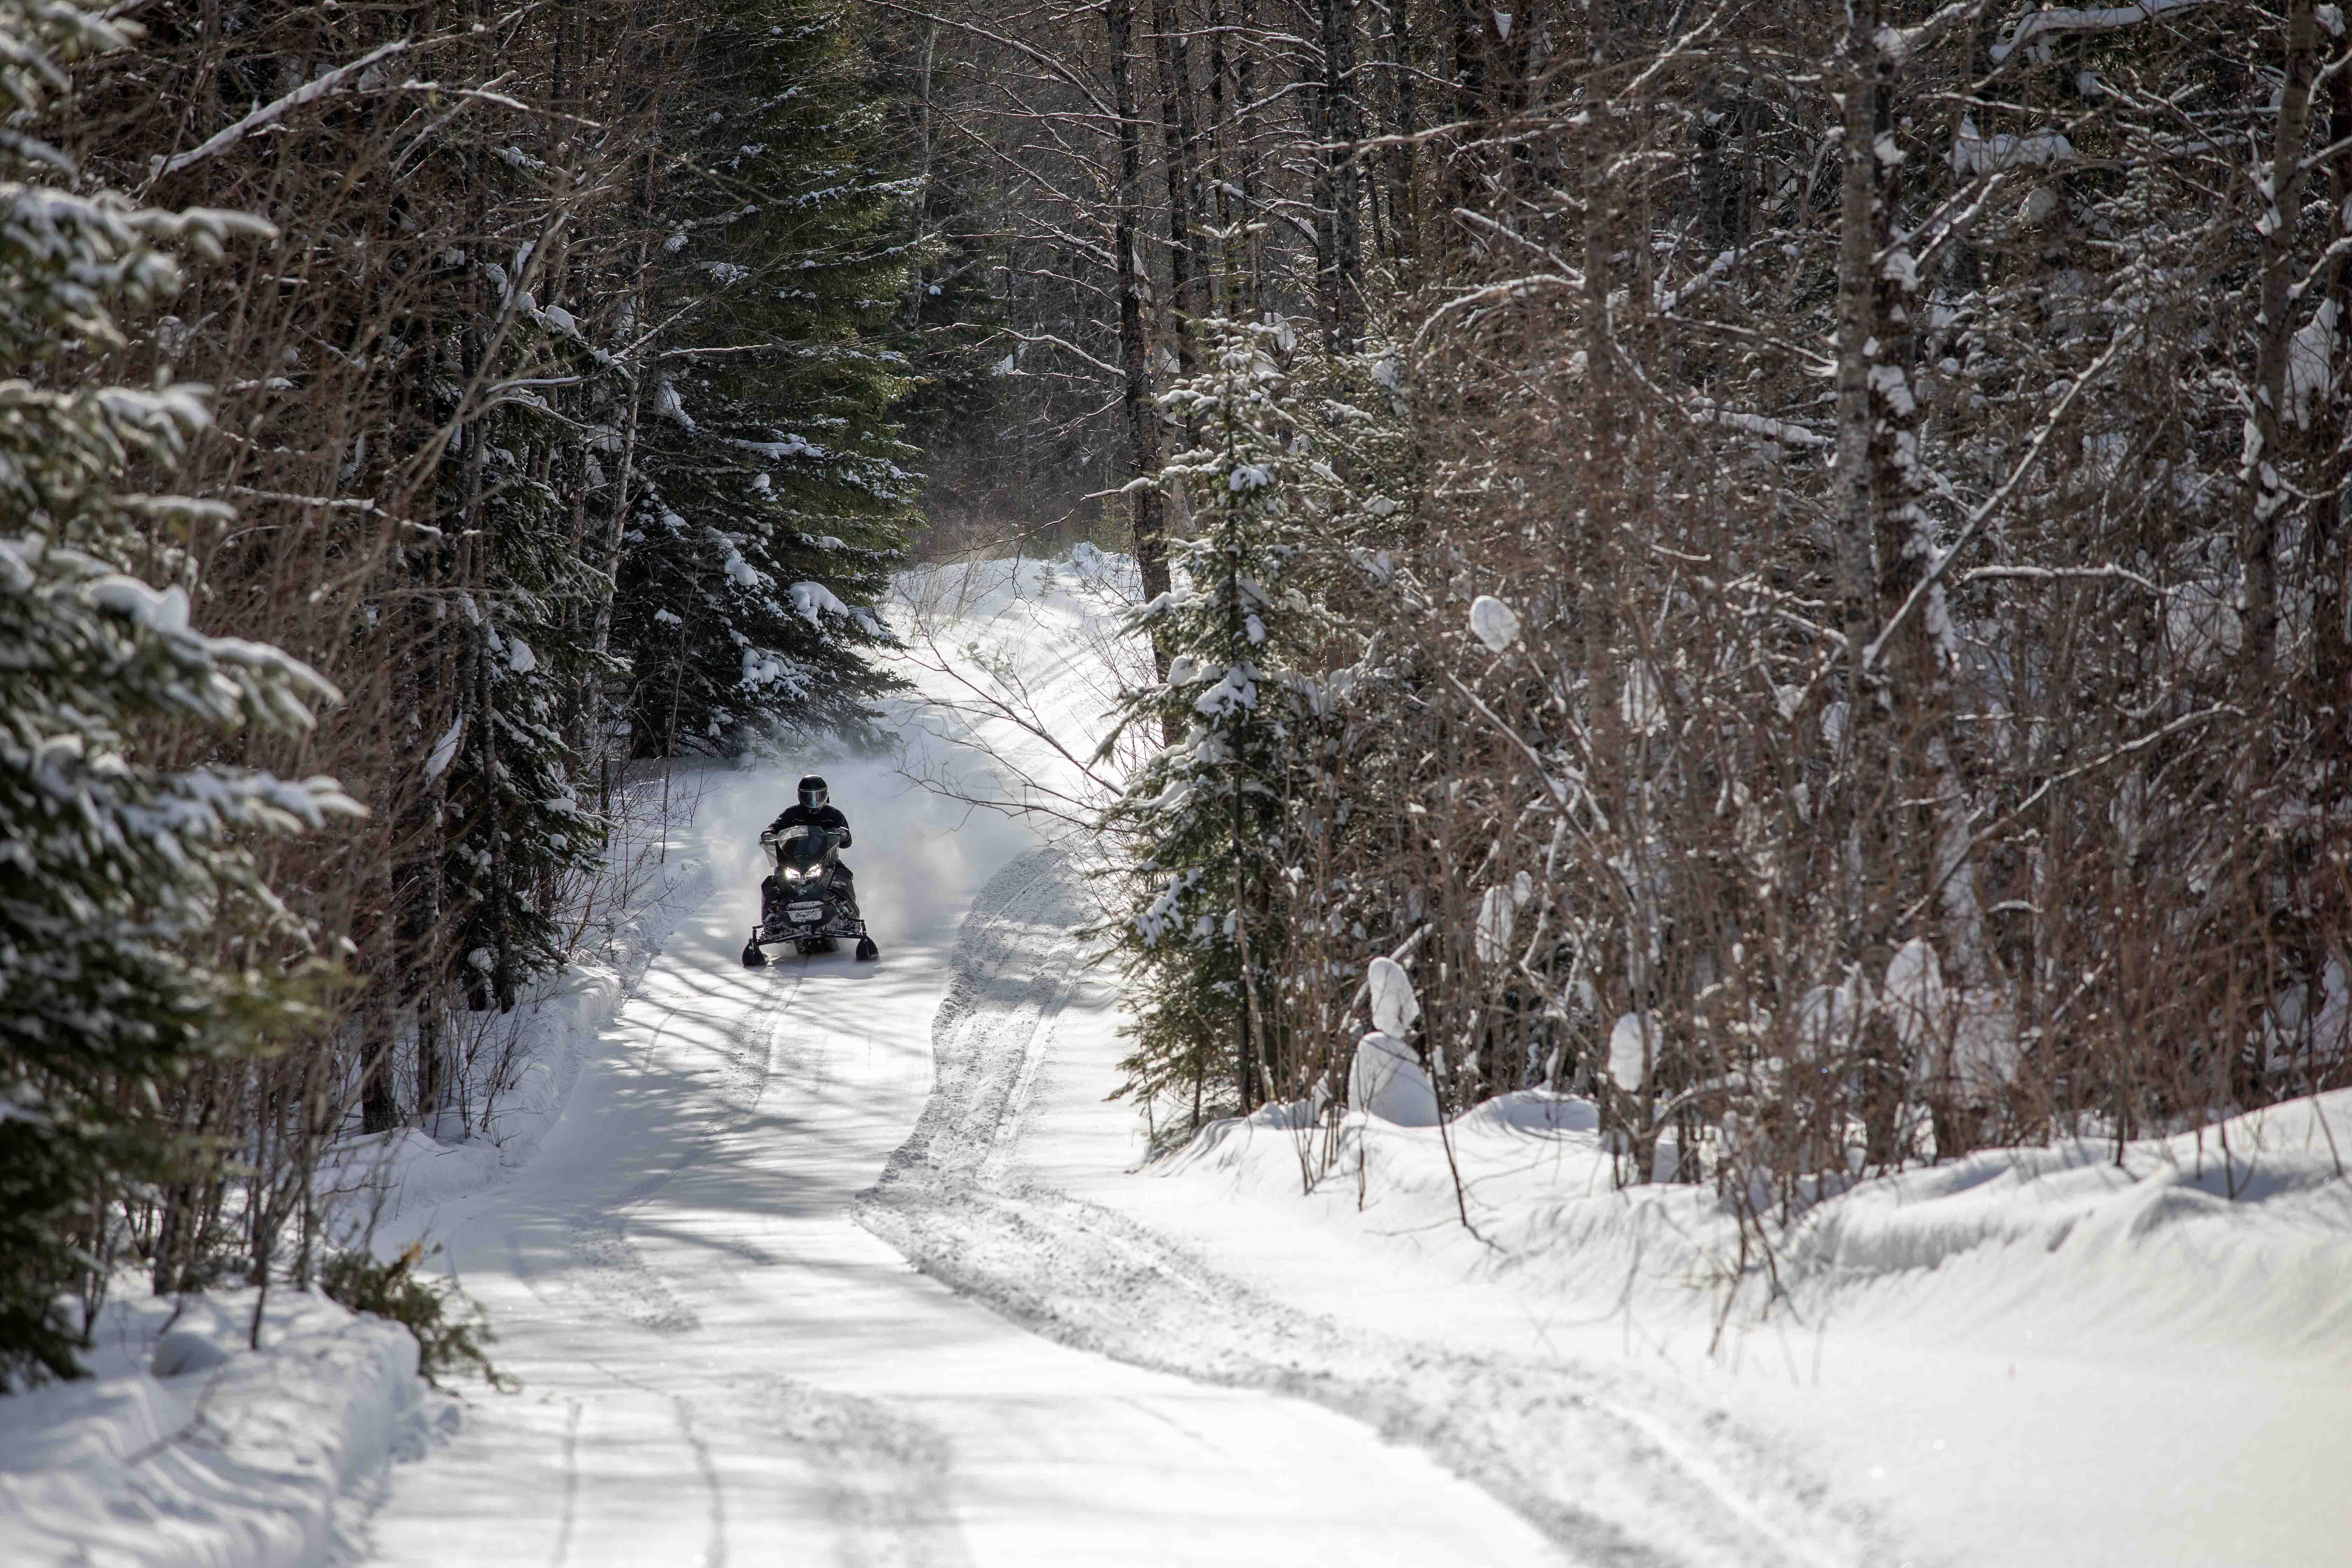 A solitary person riding a snowmobile down a snowy tail, surrounded by snow-covered spruce trees. 